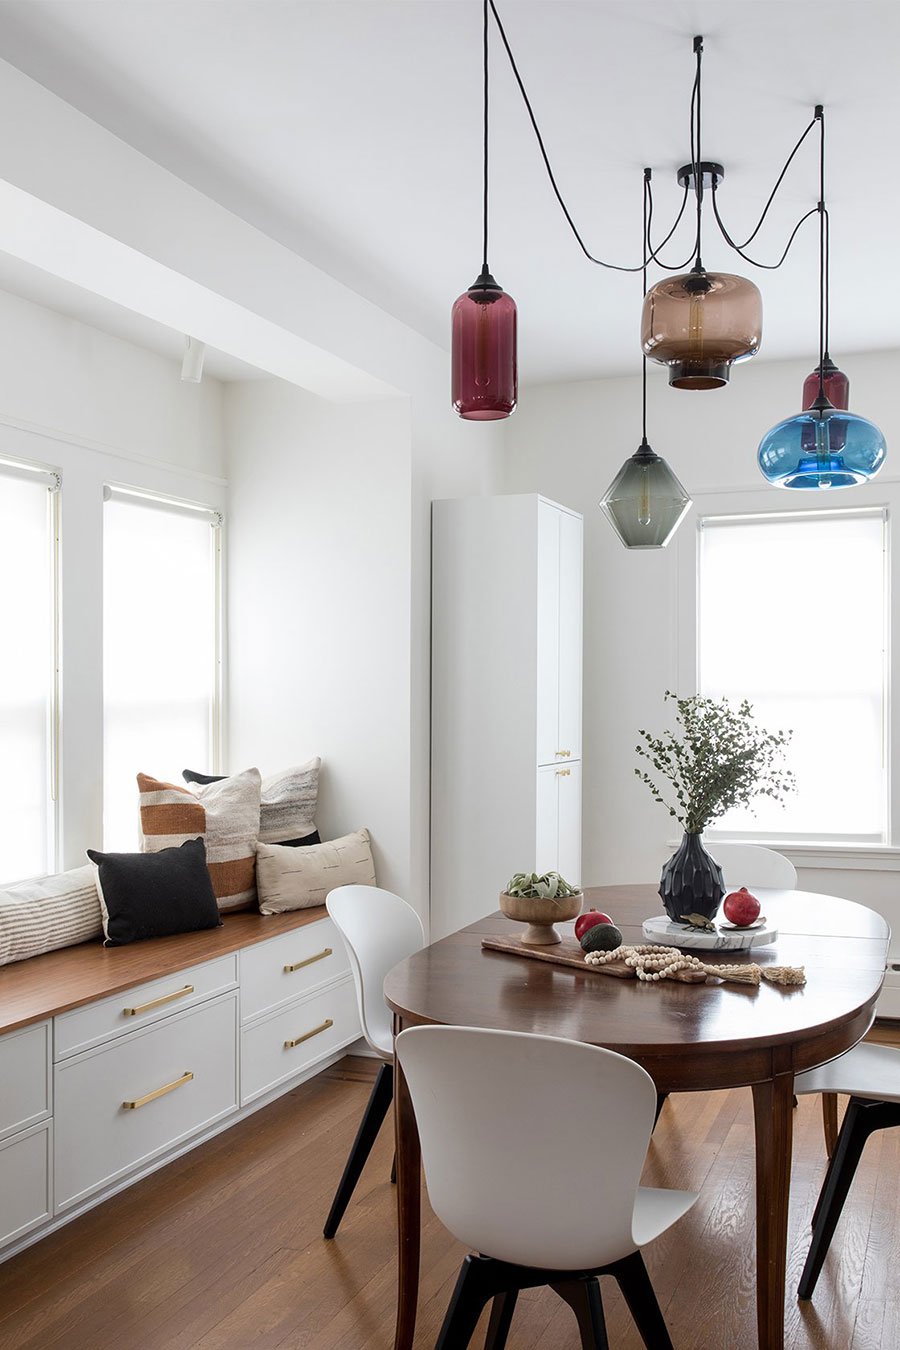 Thayer Woods - Queens, NY Dining Room Featuring a Mix of Handmade Glass Pendant Lights